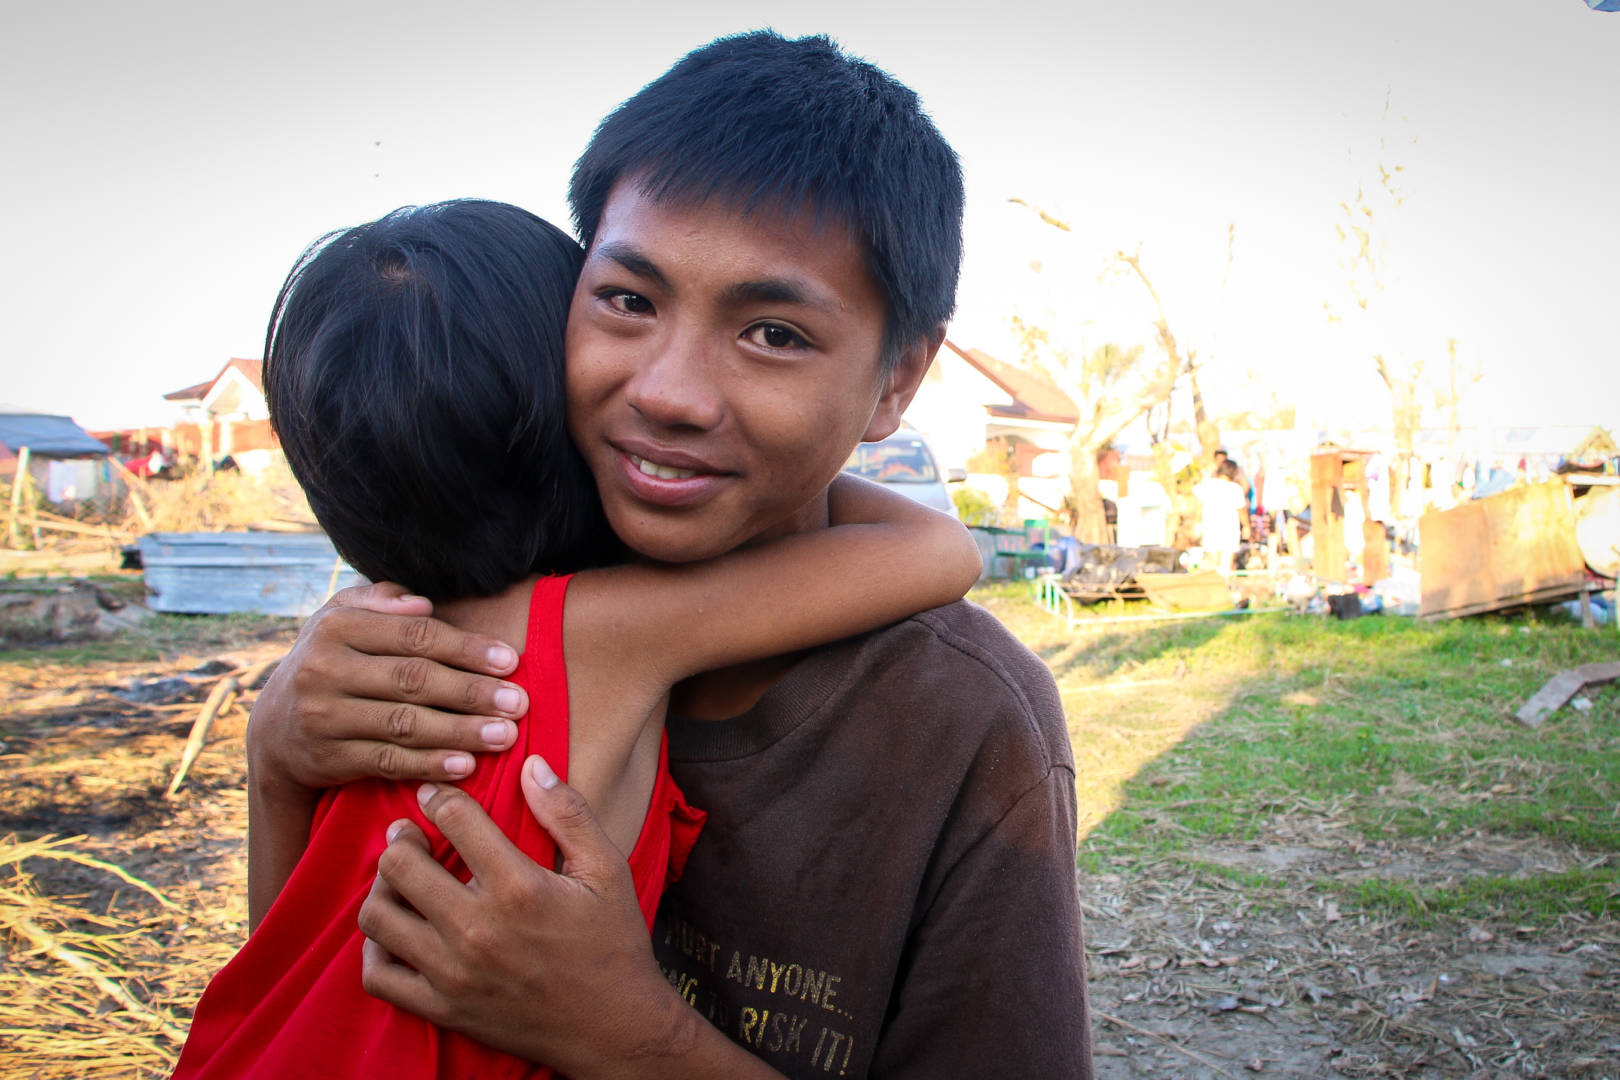 Standing near his home in the Philippines that was destroyed by Typhoon Haima in October 2016, Santiago holds his 4-year-old sister Princess. (©2016 World Vision, photo by Joy Malujo)